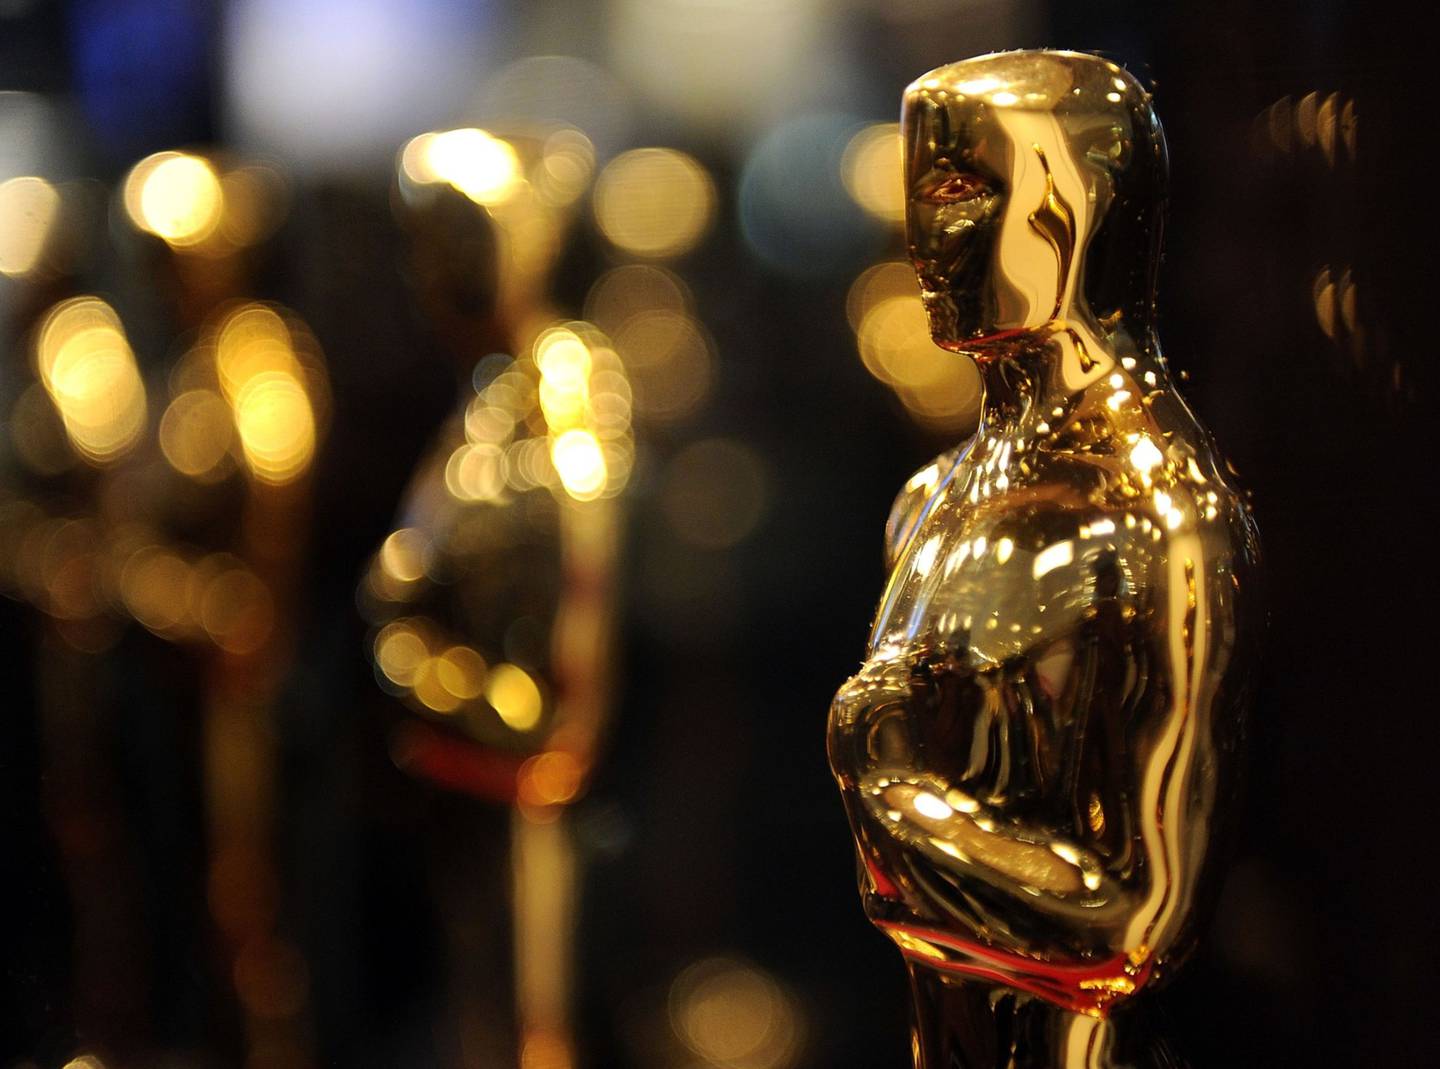 Oscar statues on display at "Meet the Oscars". Photographer: Andrew H. Walker/Getty Images North Americadfd